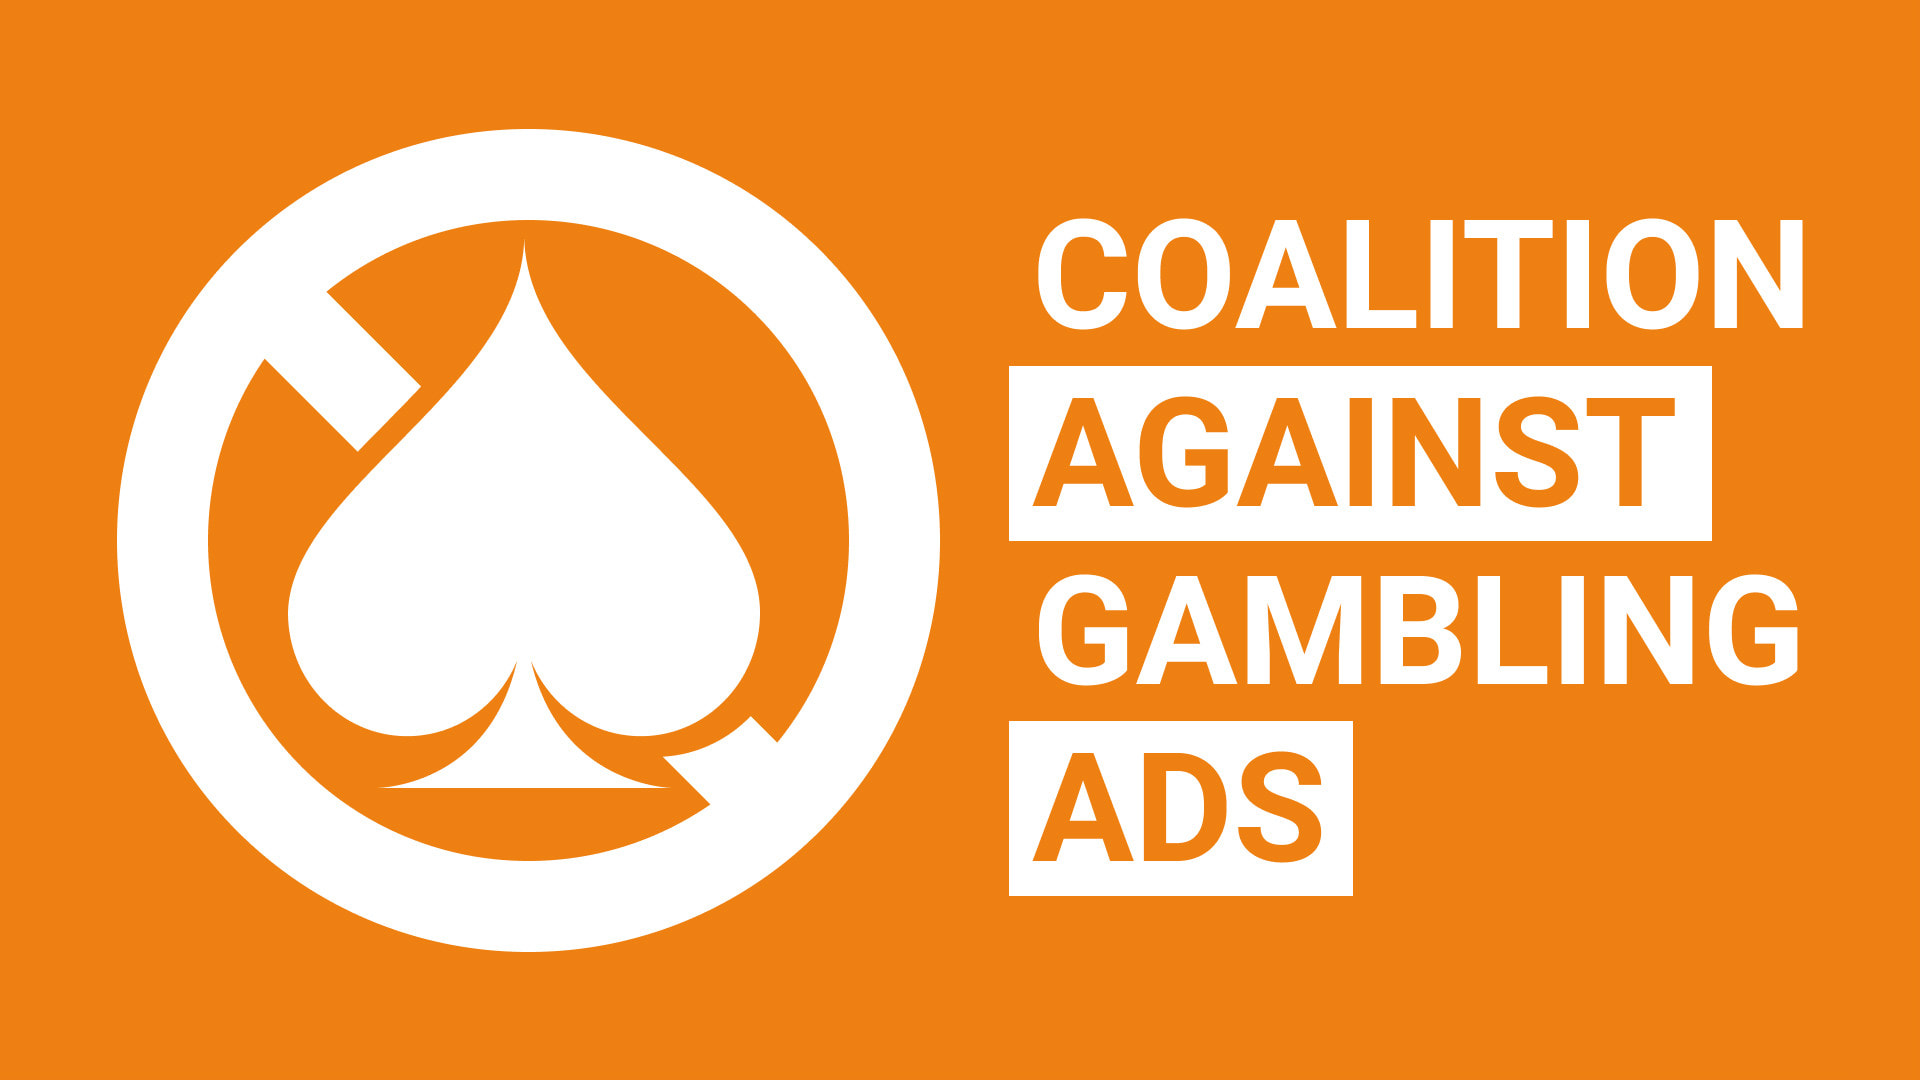 Coalition Against Gambling Ads